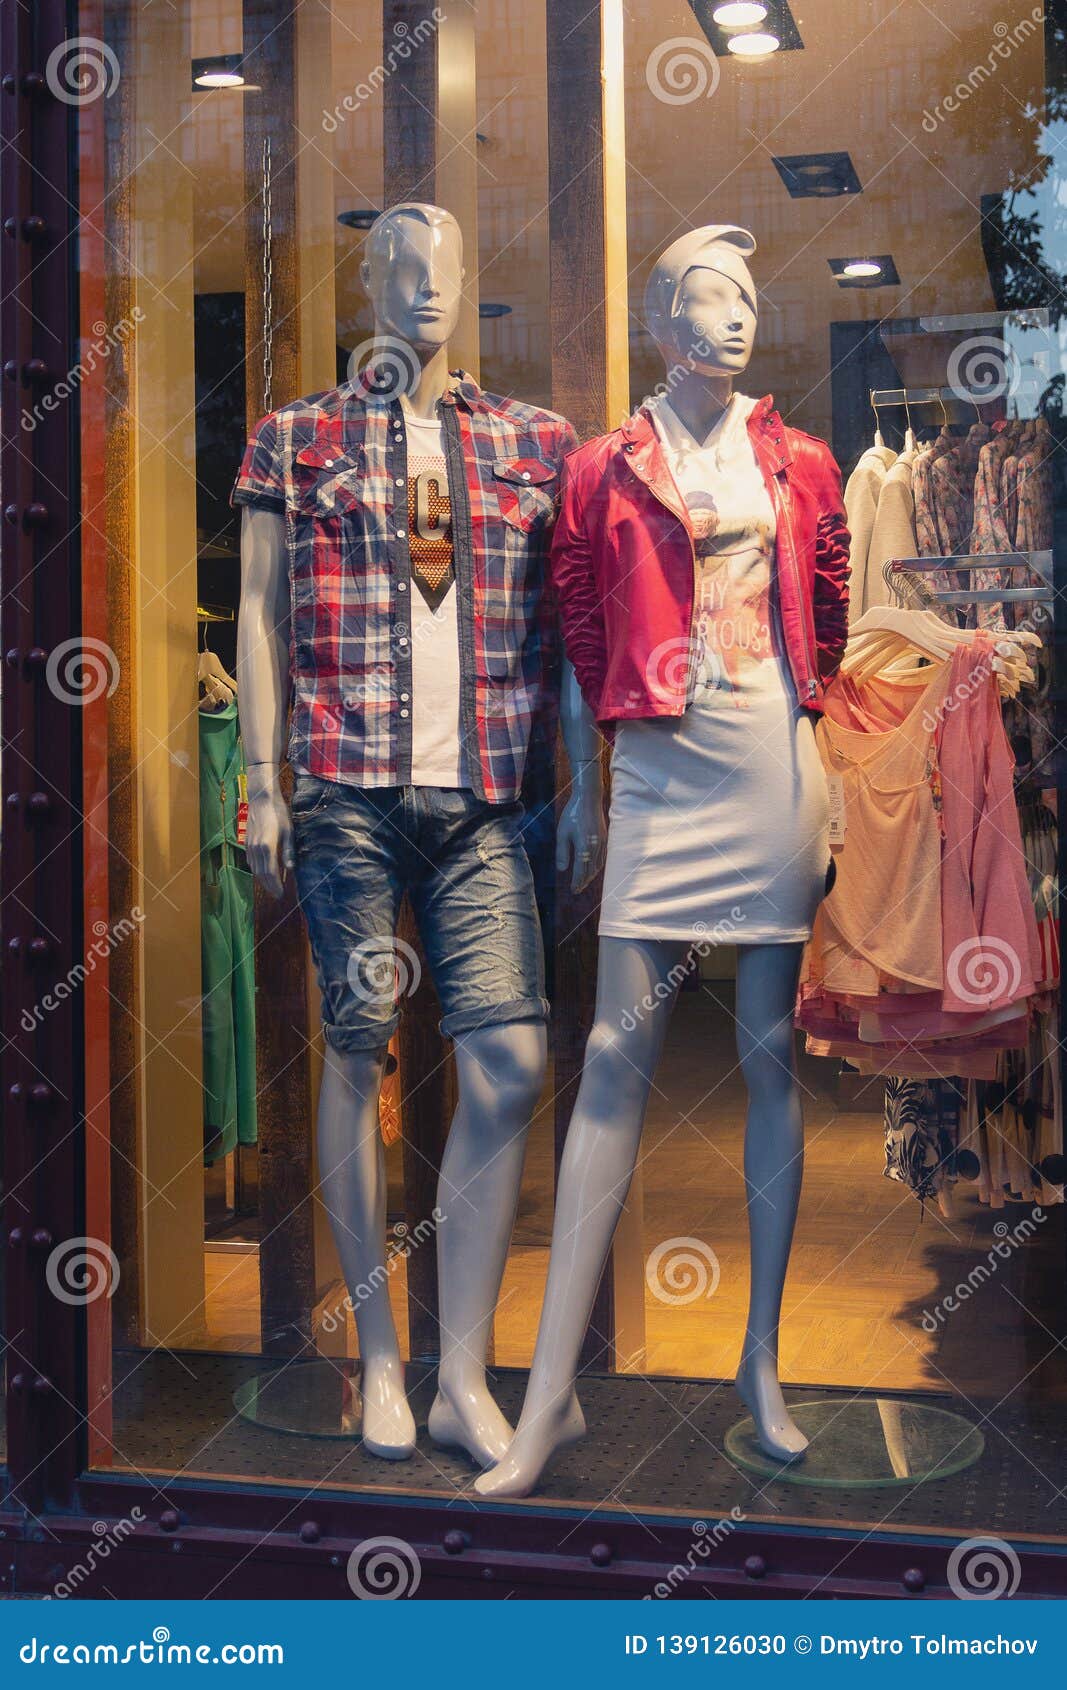 Women`s Clothing on Two Mannequins in a Shop Window Stock Photo - Image ...